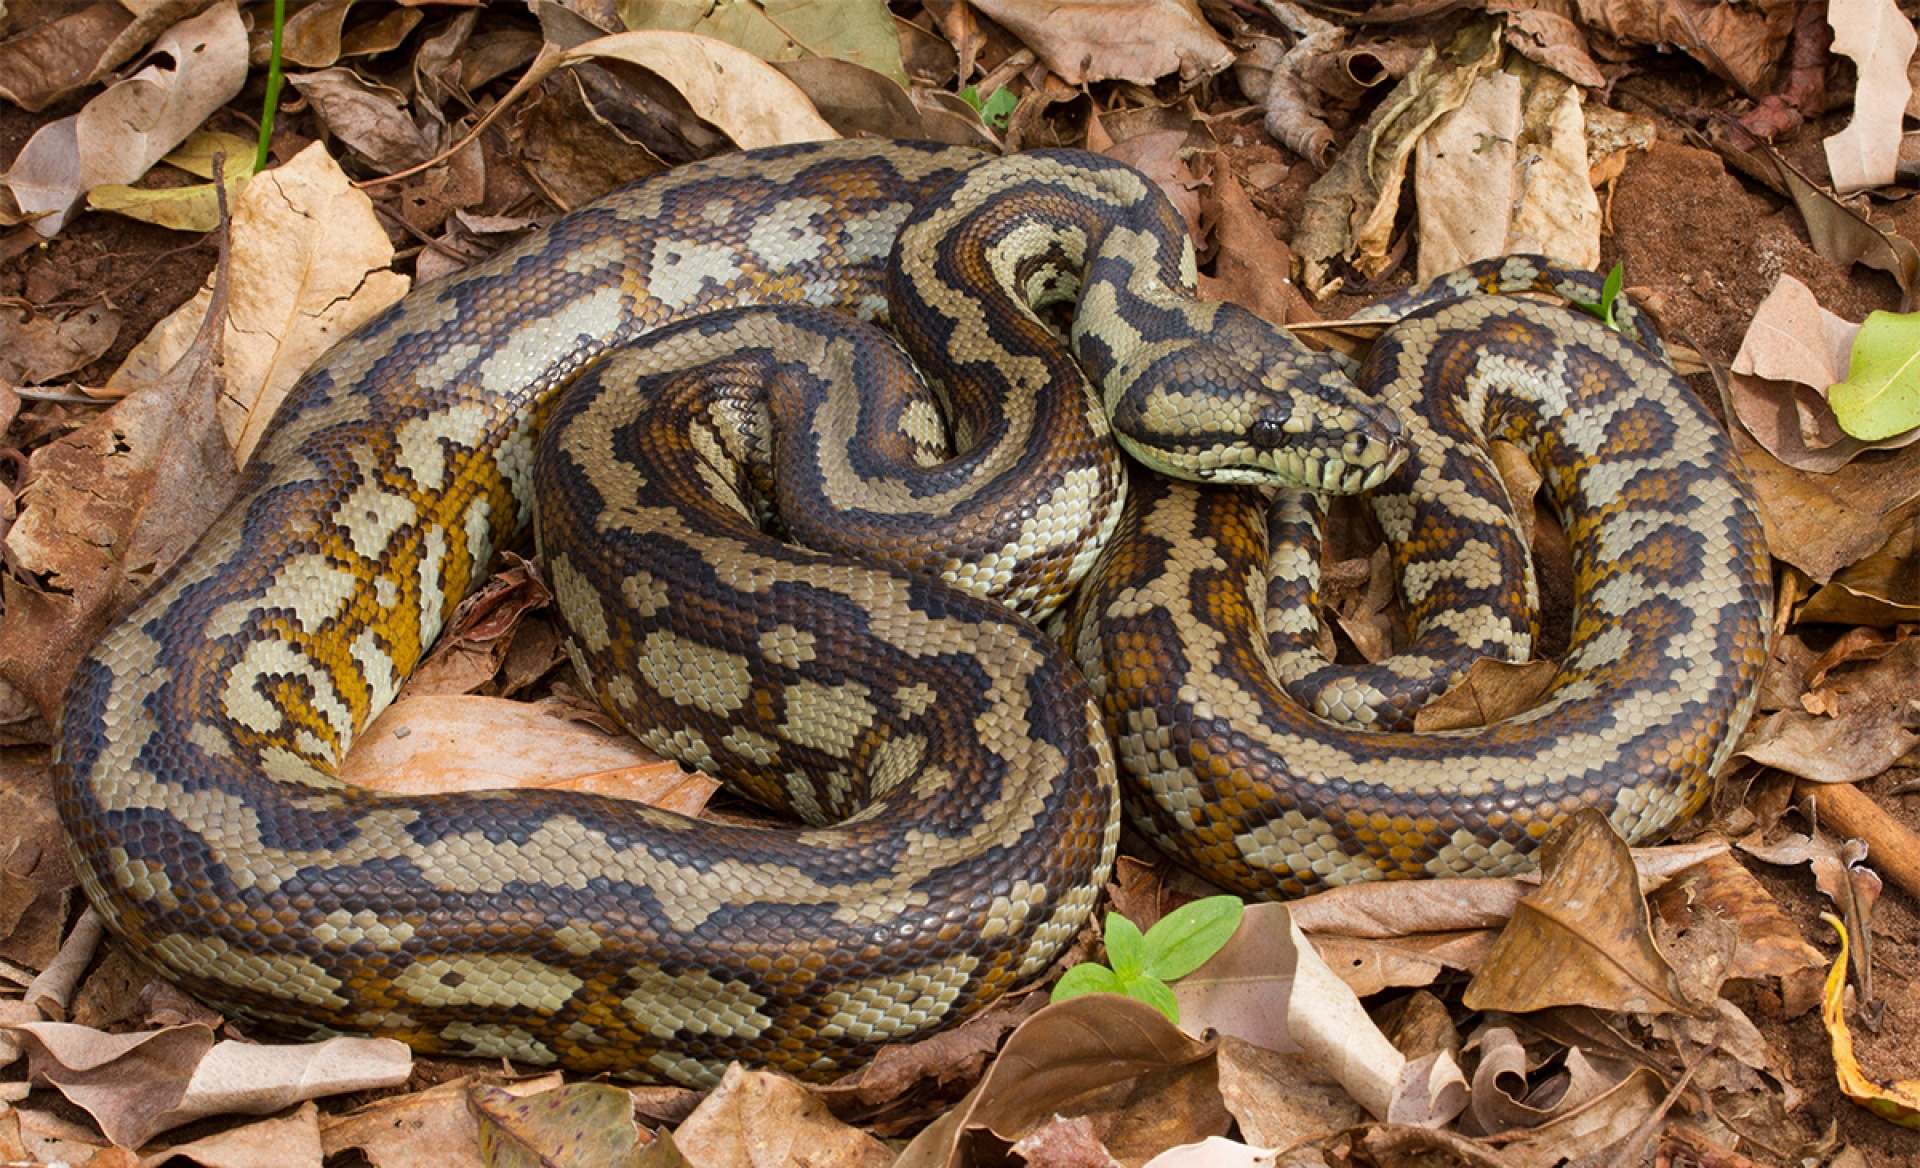 What is a Carpet Python? 2